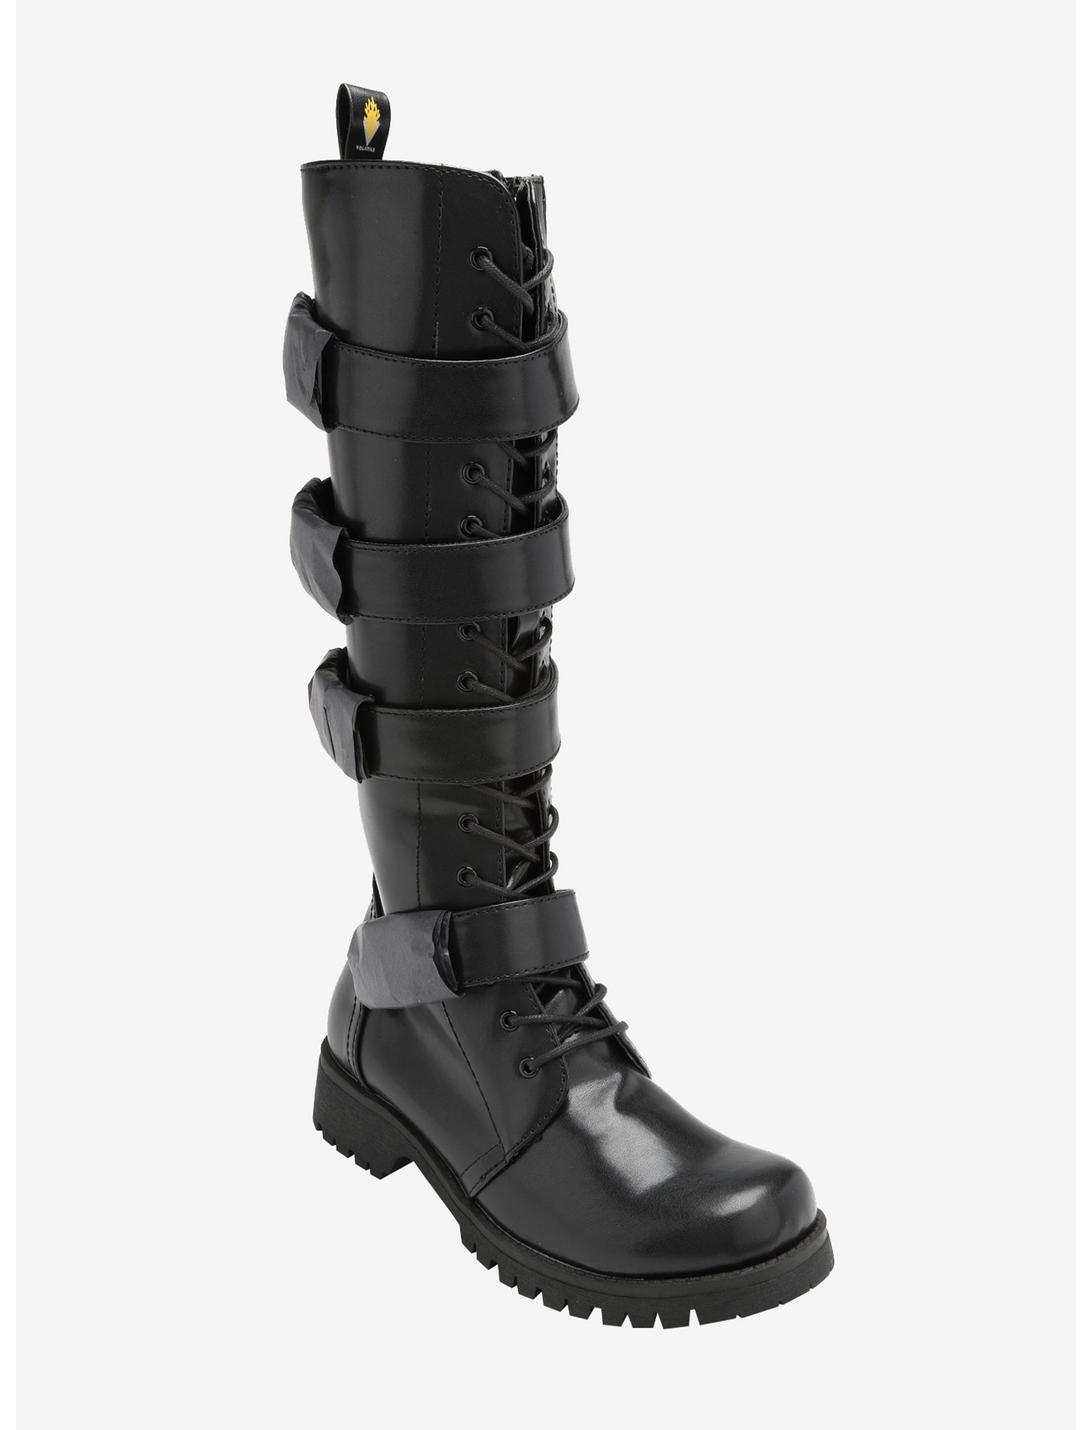 Volatile 4 Buckle Lace-Up Knee Boots, MULTI, hi-res